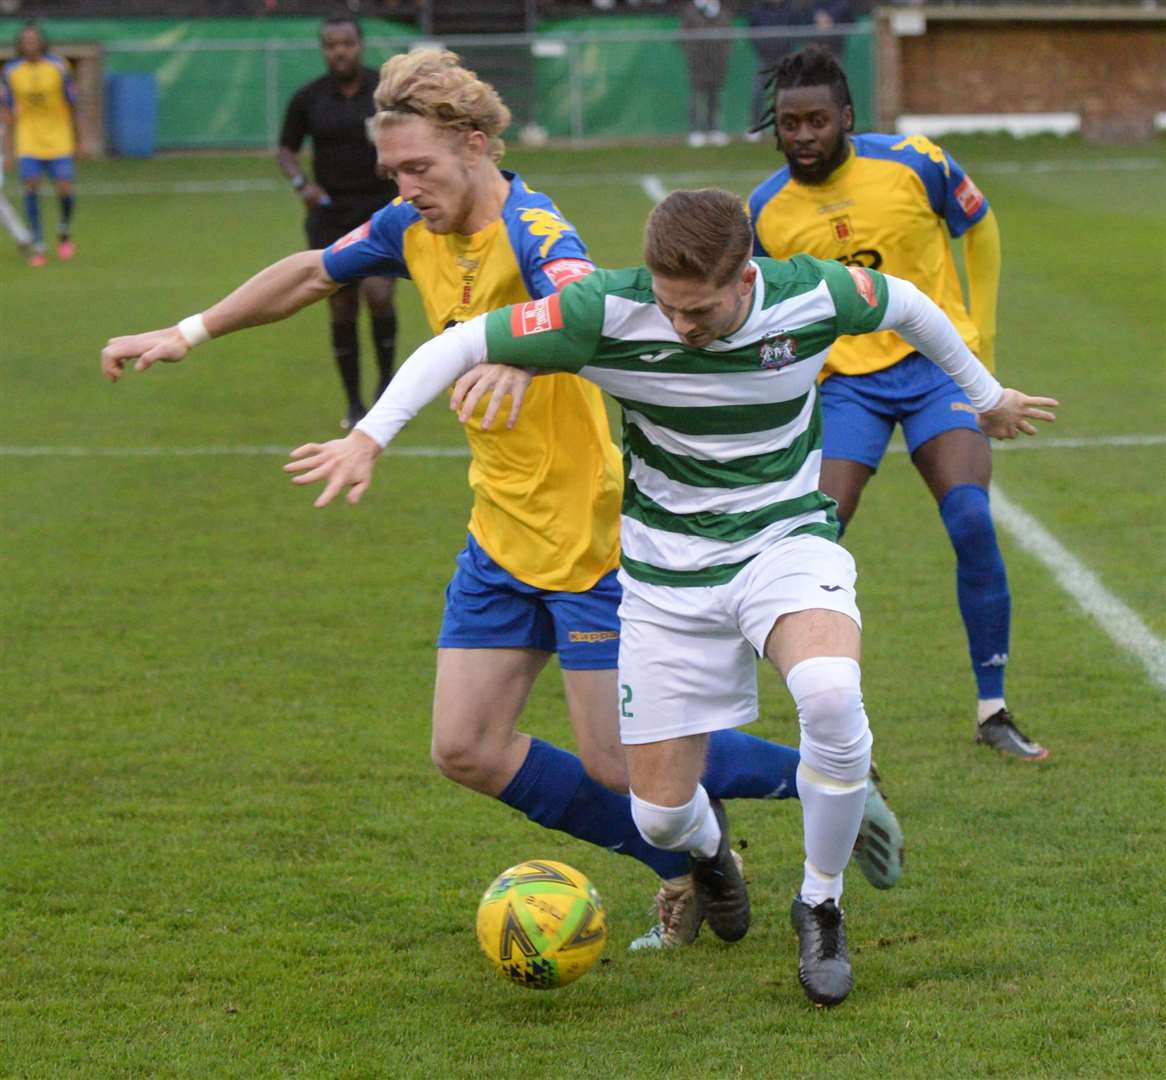 Town defender Charlie Dickens gets stuck on Saturday. Picture: Chris Davey